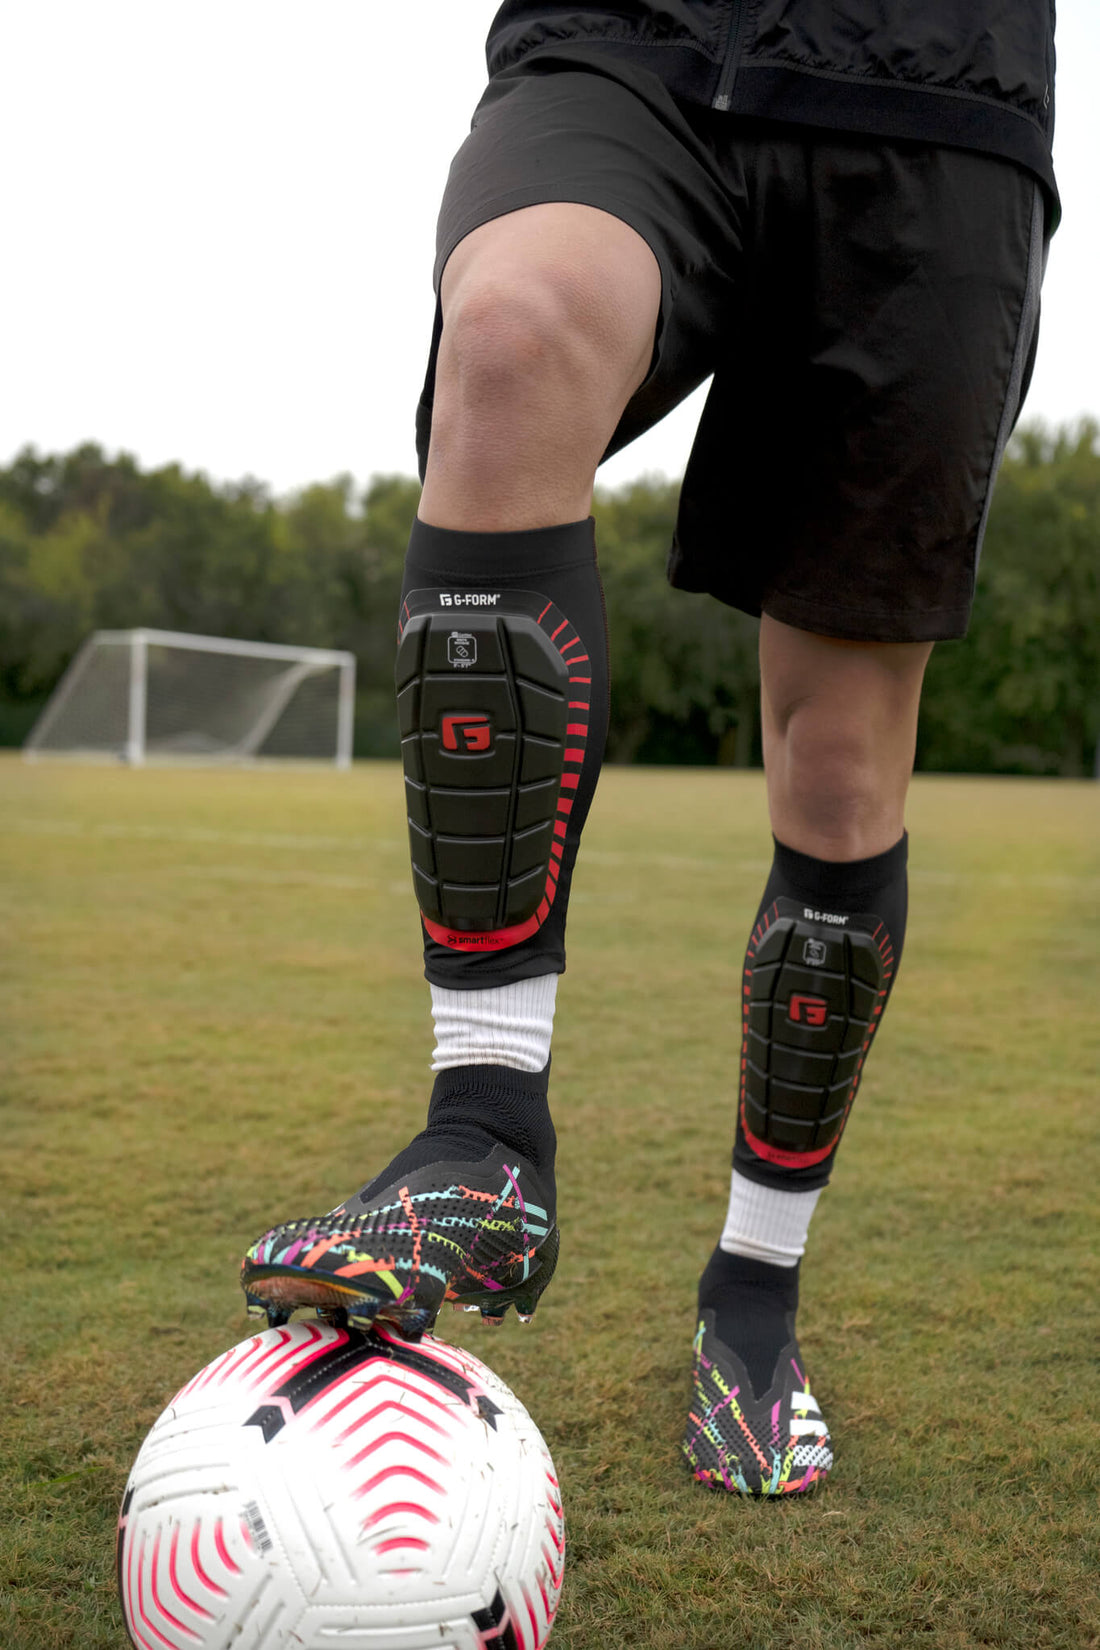 How to Wear Your Soccer Shin Guards – Grassroots Sports Group